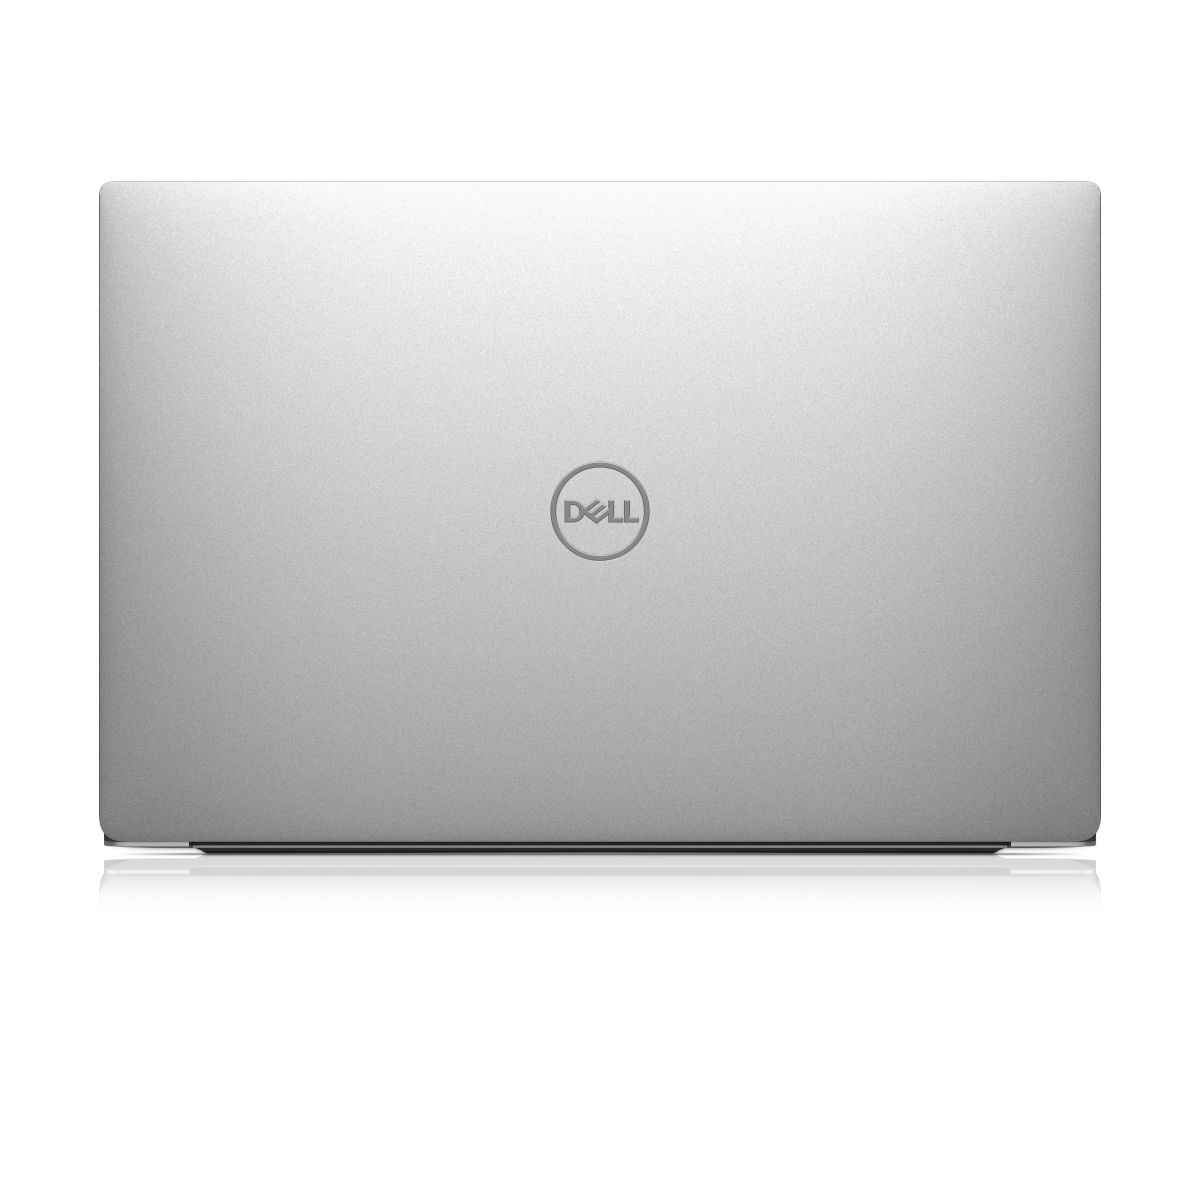 Dell Xps 15 9570 9570 0309 Laptop Specifications